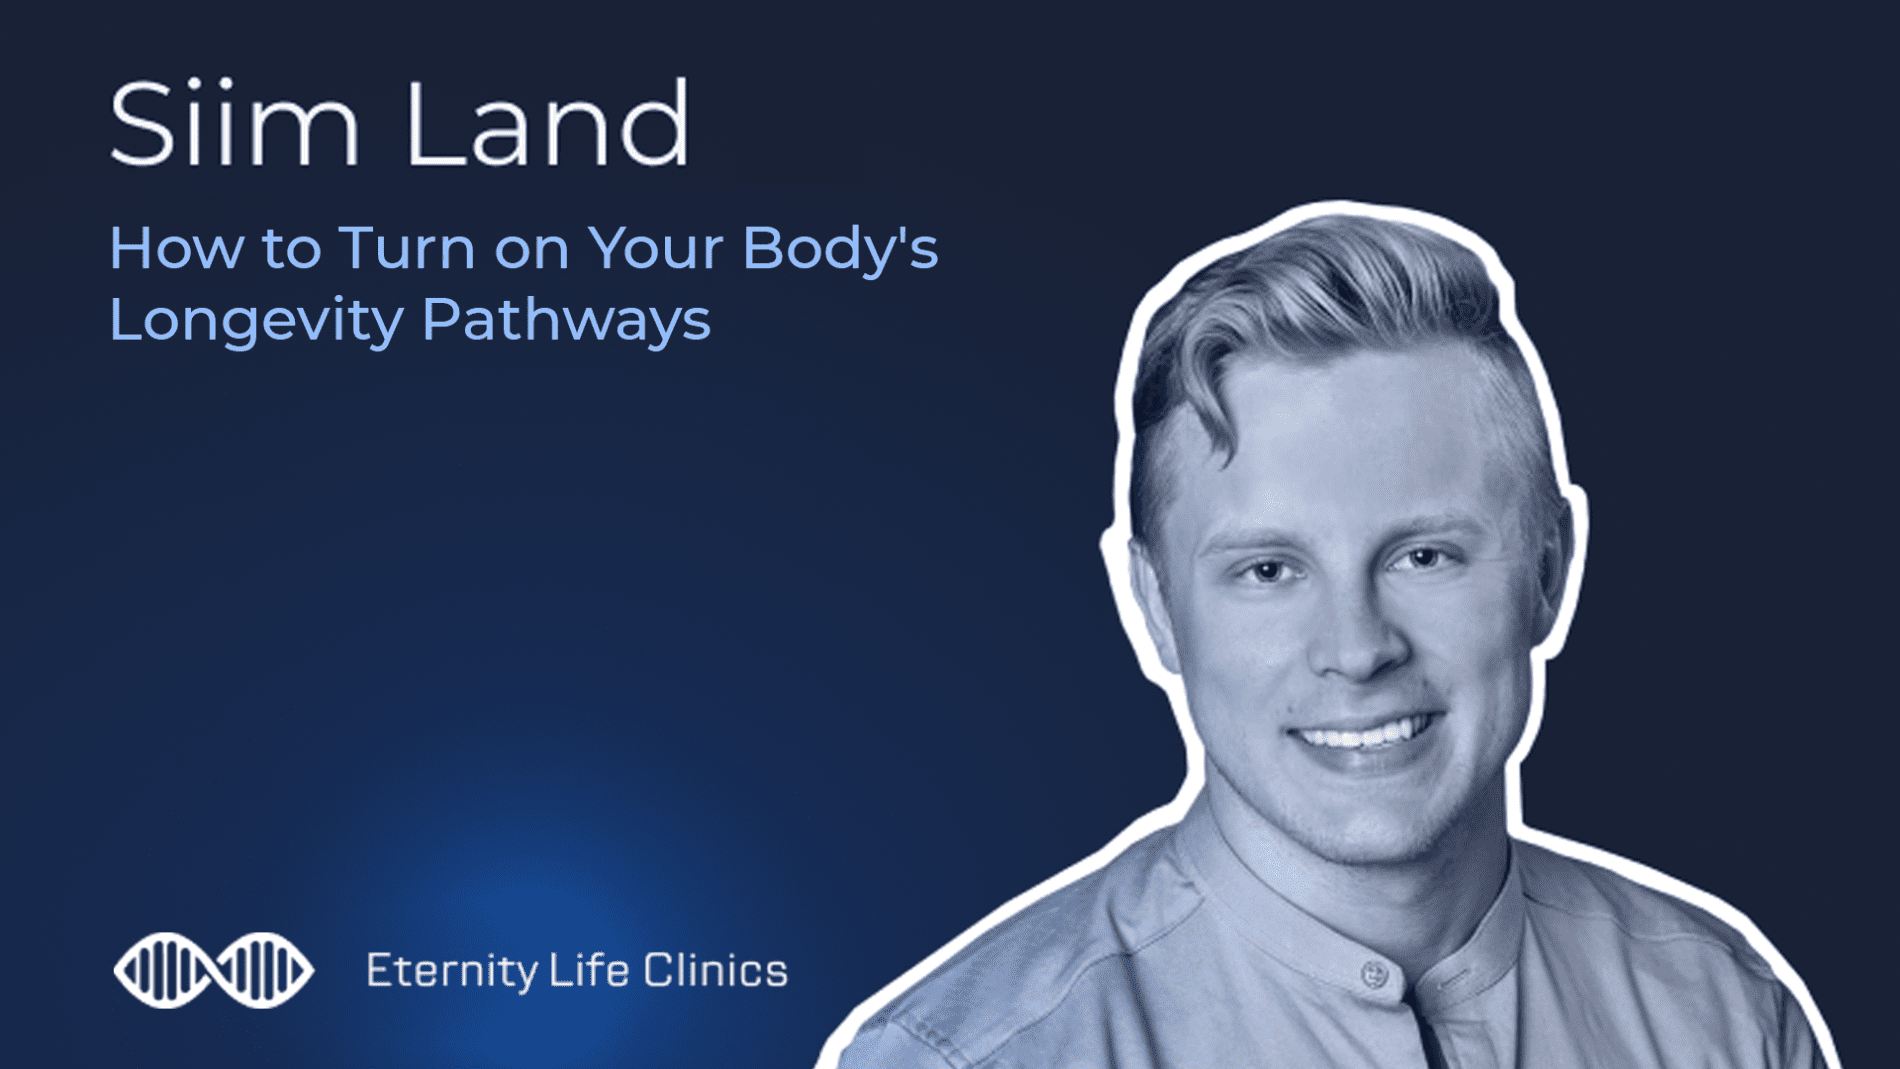 Eternity Life Clinics - NAD and circadian rhythms: anthropologist Siim Land told about organism aging, importance of sleep and physical activity